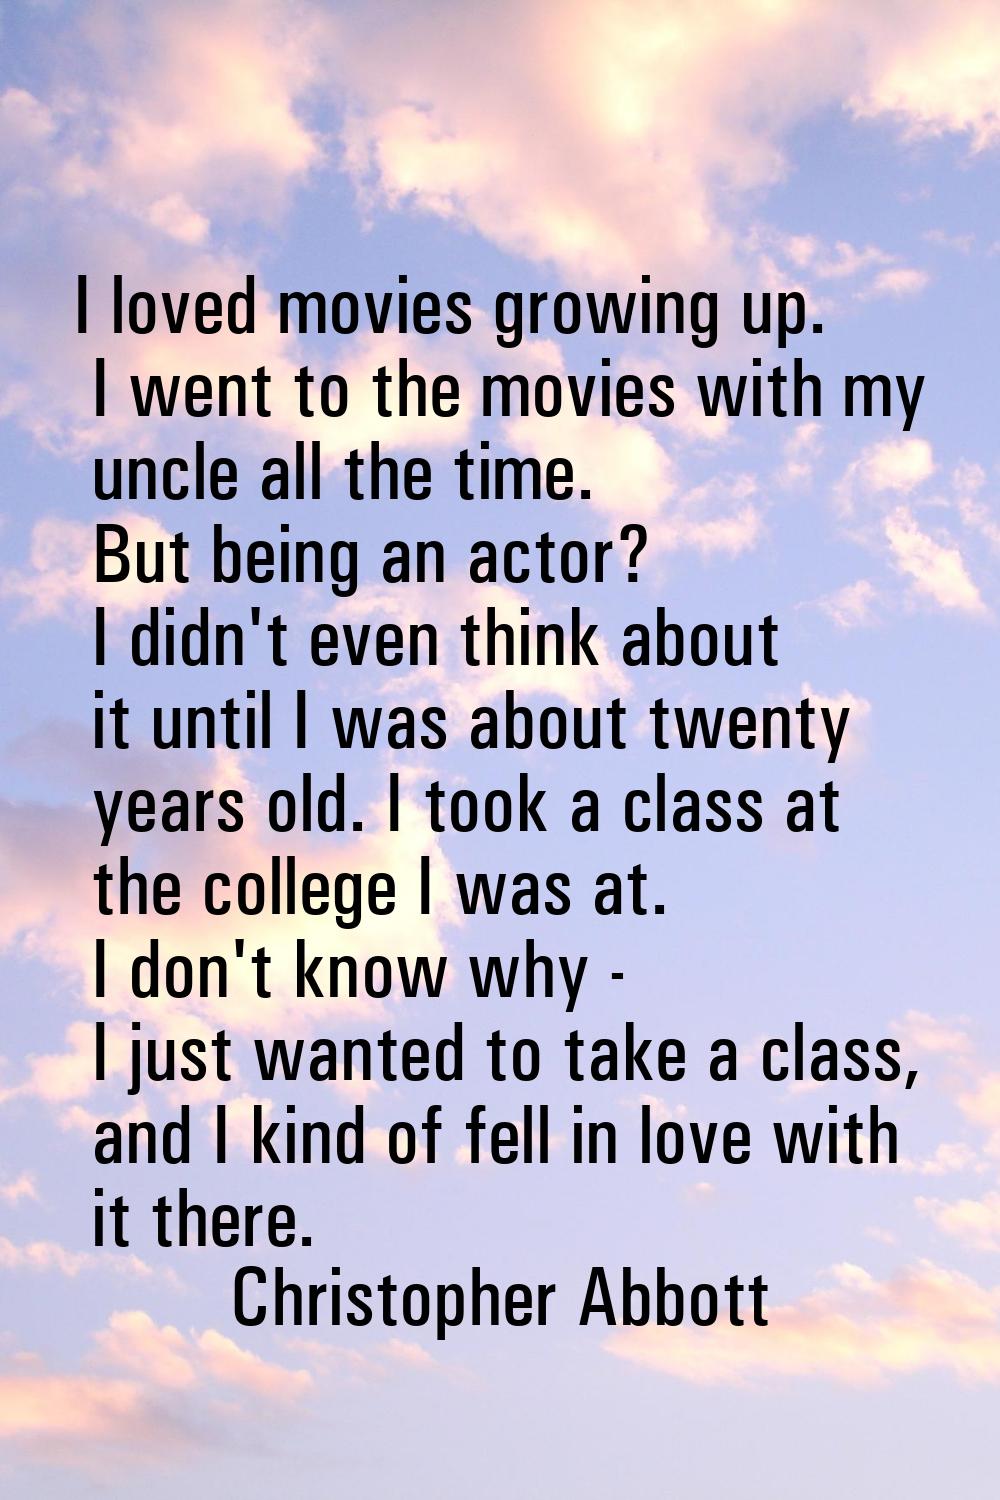 I loved movies growing up. I went to the movies with my uncle all the time. But being an actor? I d